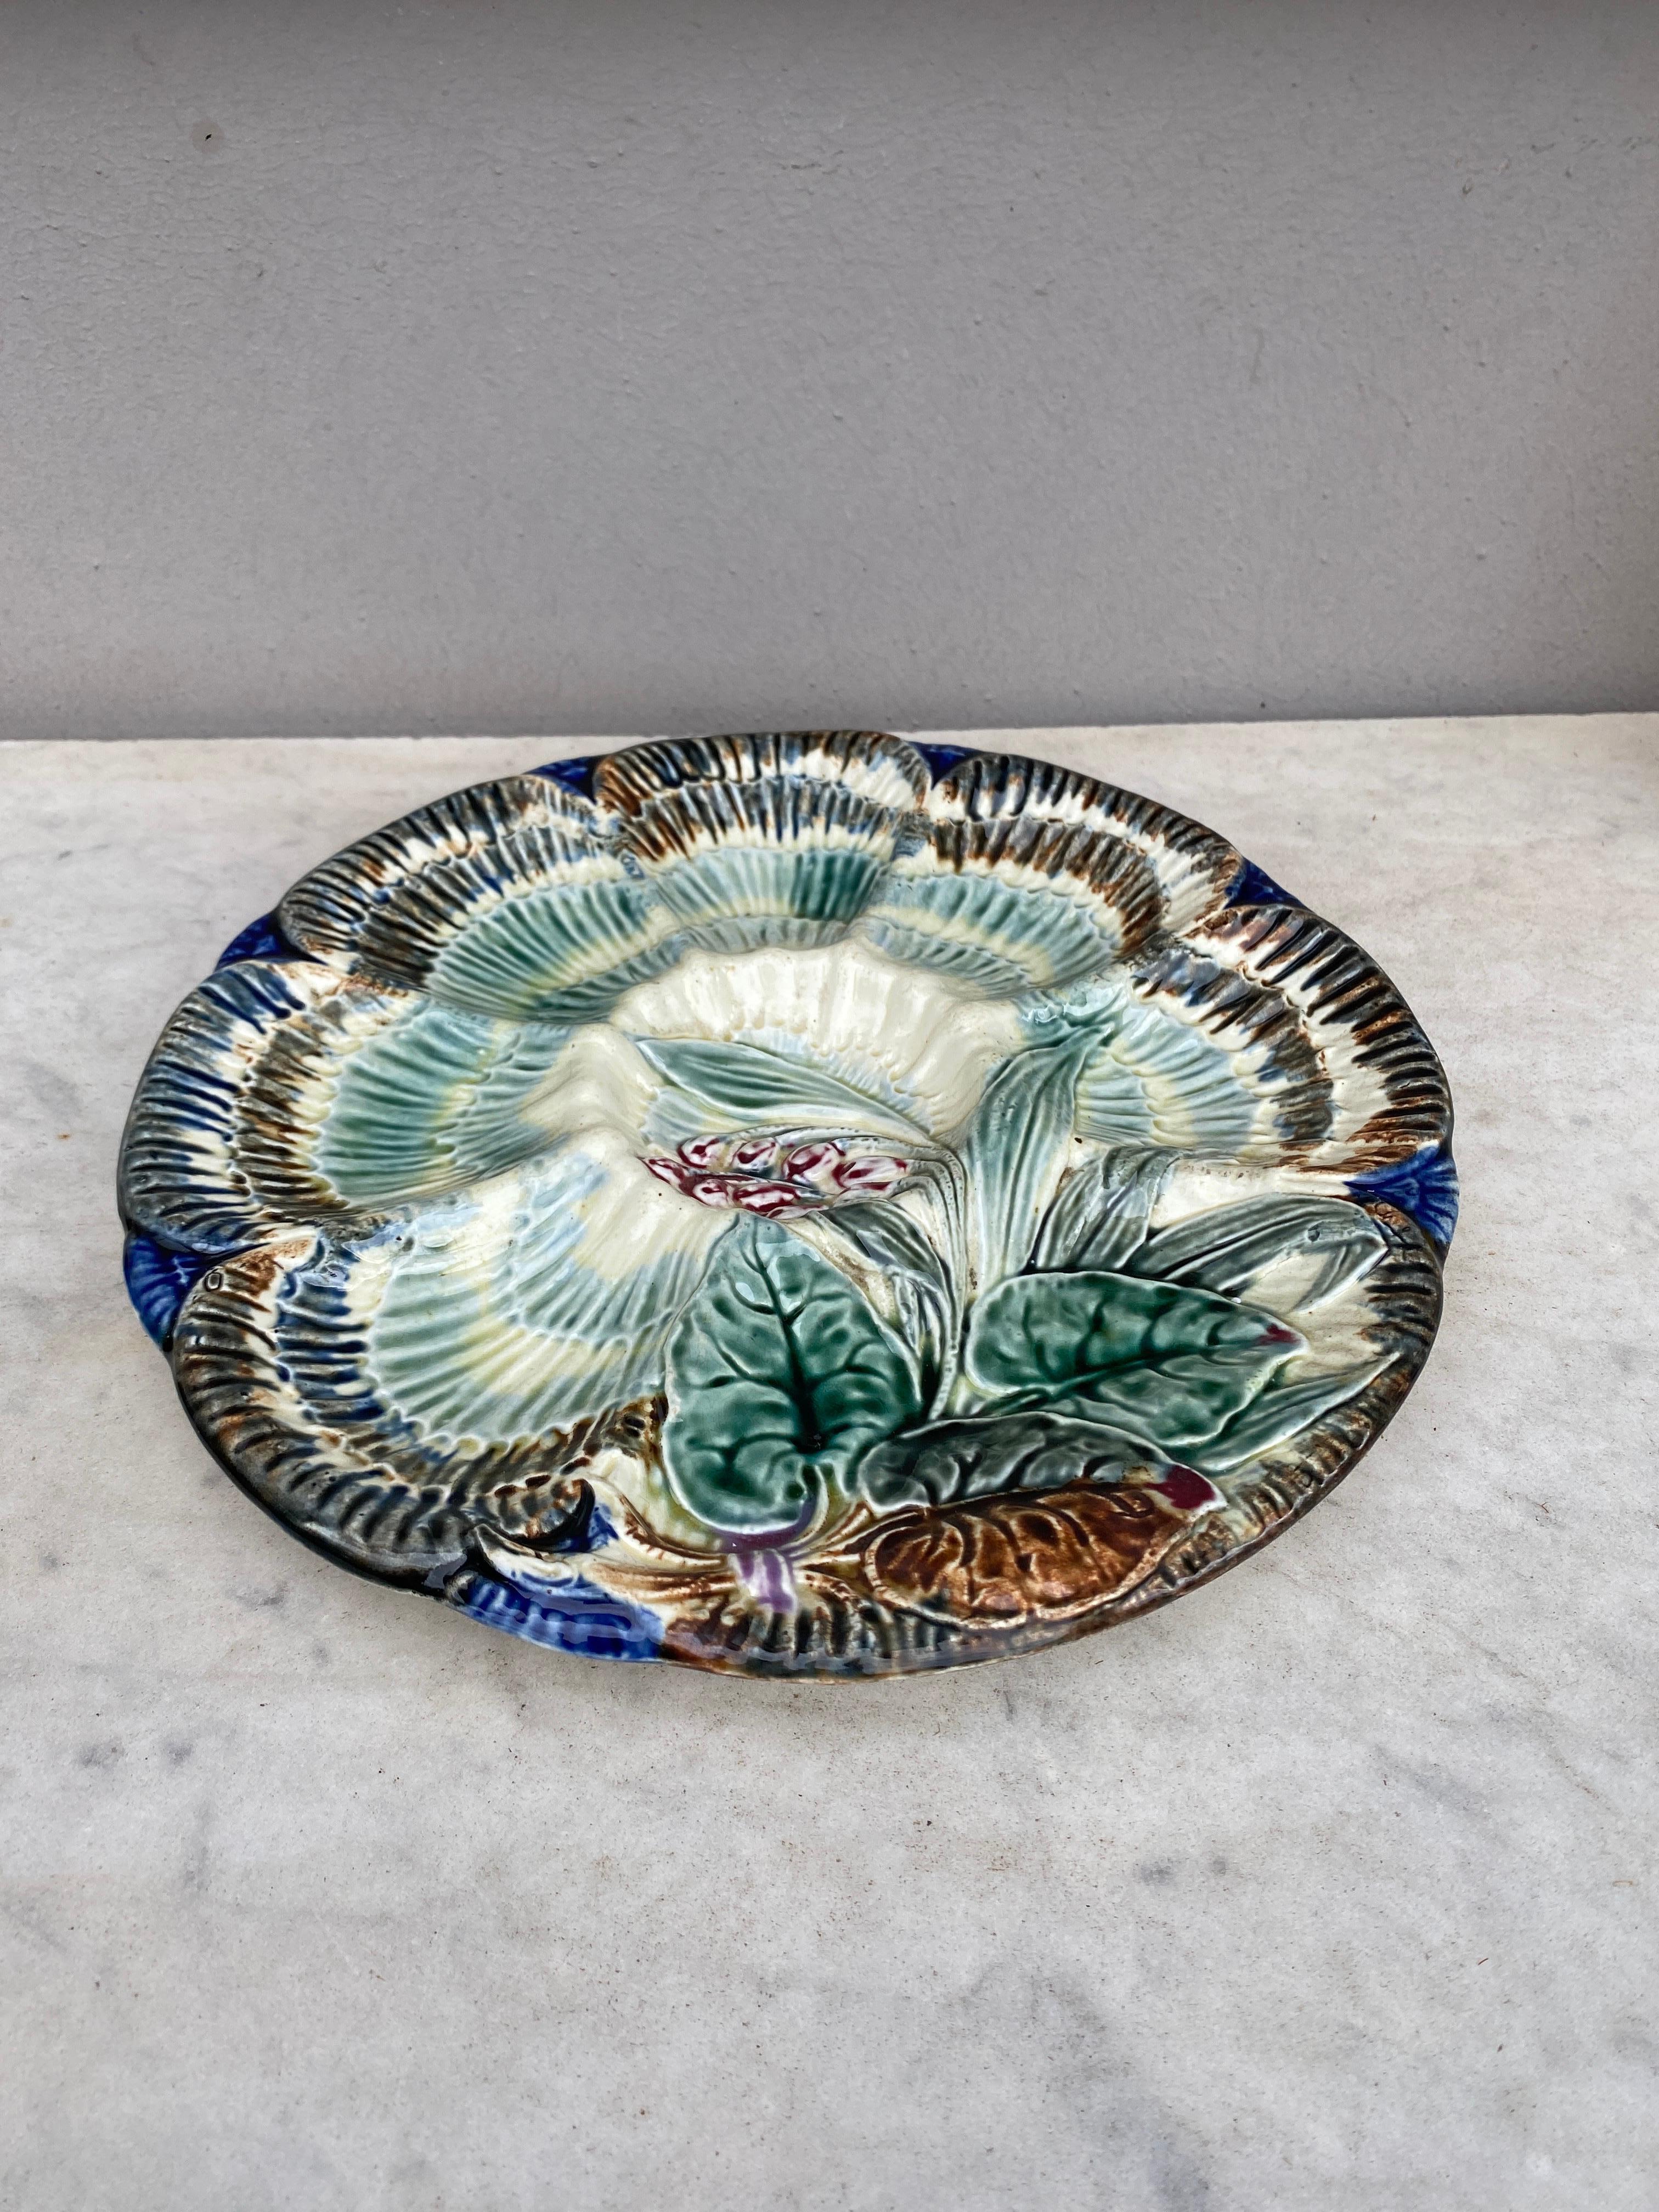 Aesthetic Movement 19th Century Majolica Oyster Plate Wasmuel